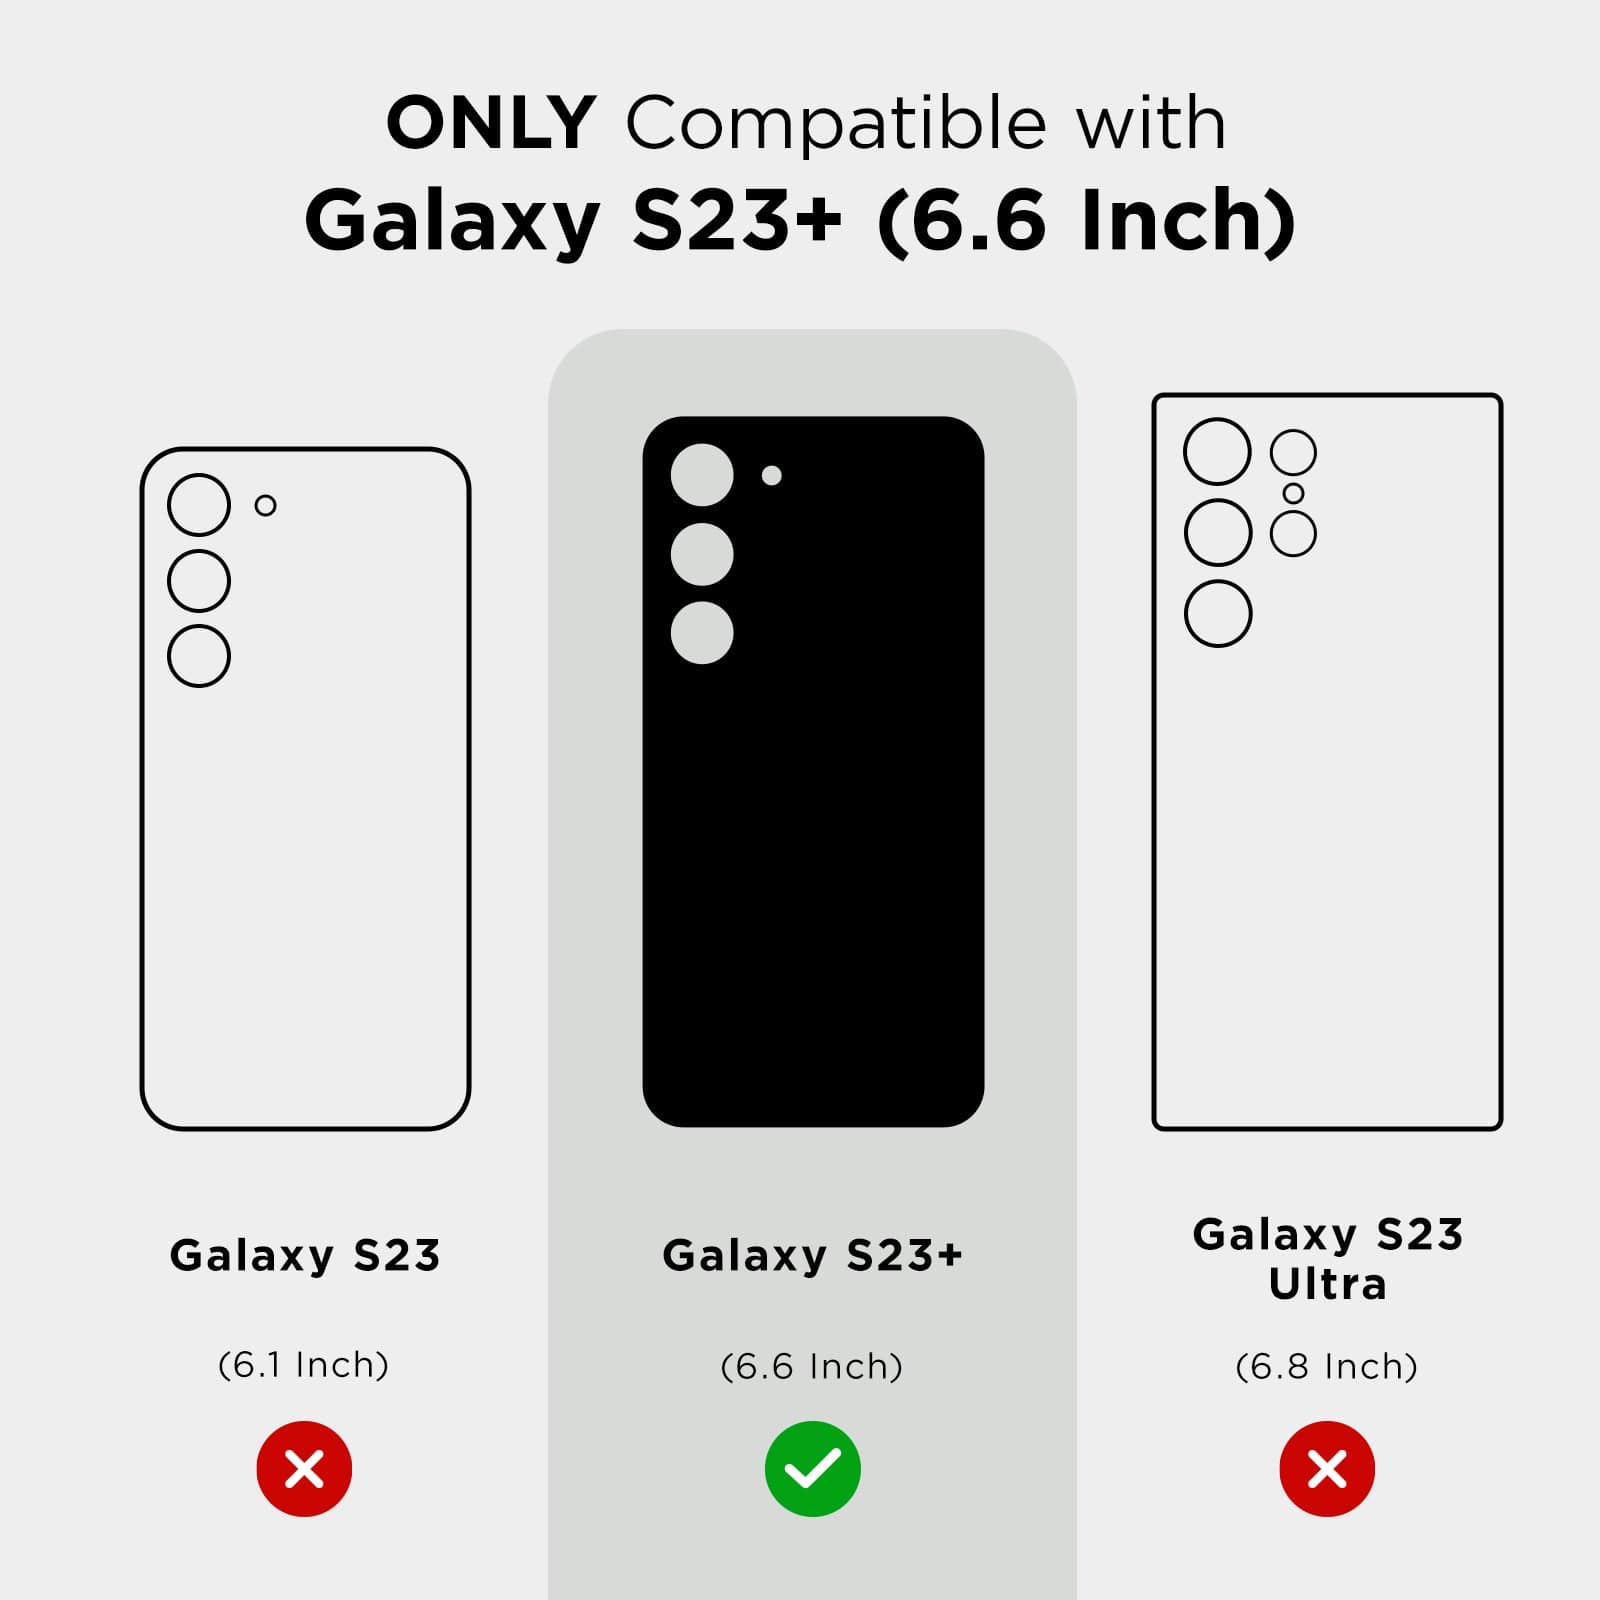 ONLY COMPATIBLE WITH GALAXY S23+